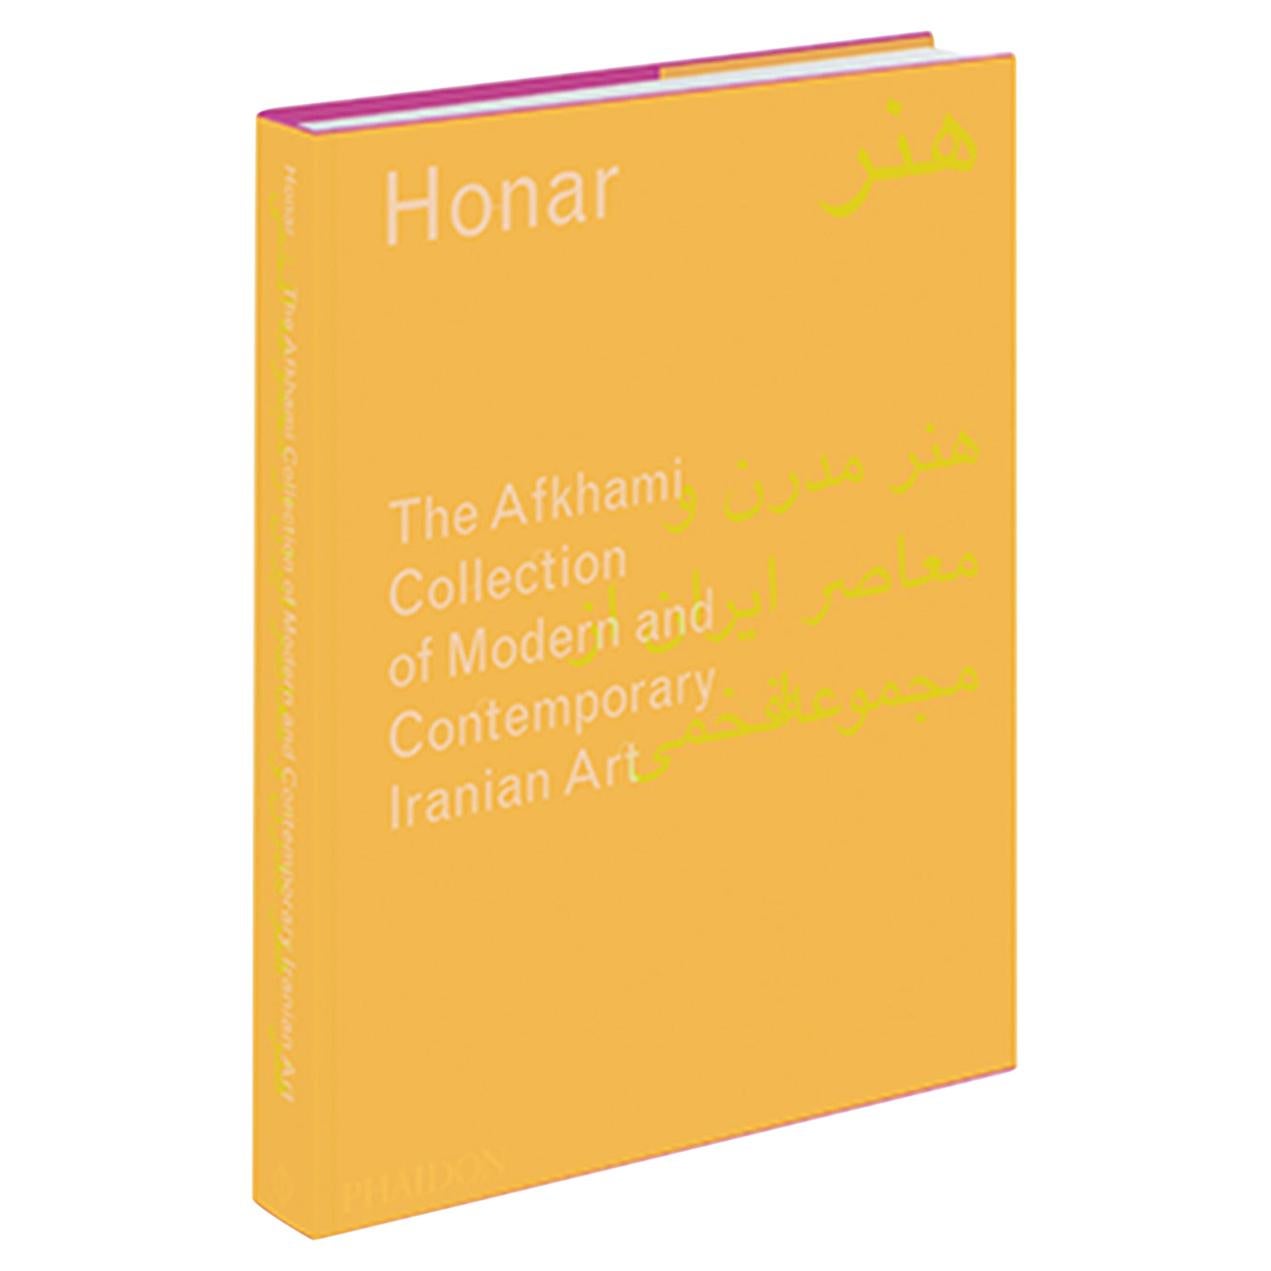 Honar - The Afkhami Collection of Modern and Contemporary Iranian Art For Sale